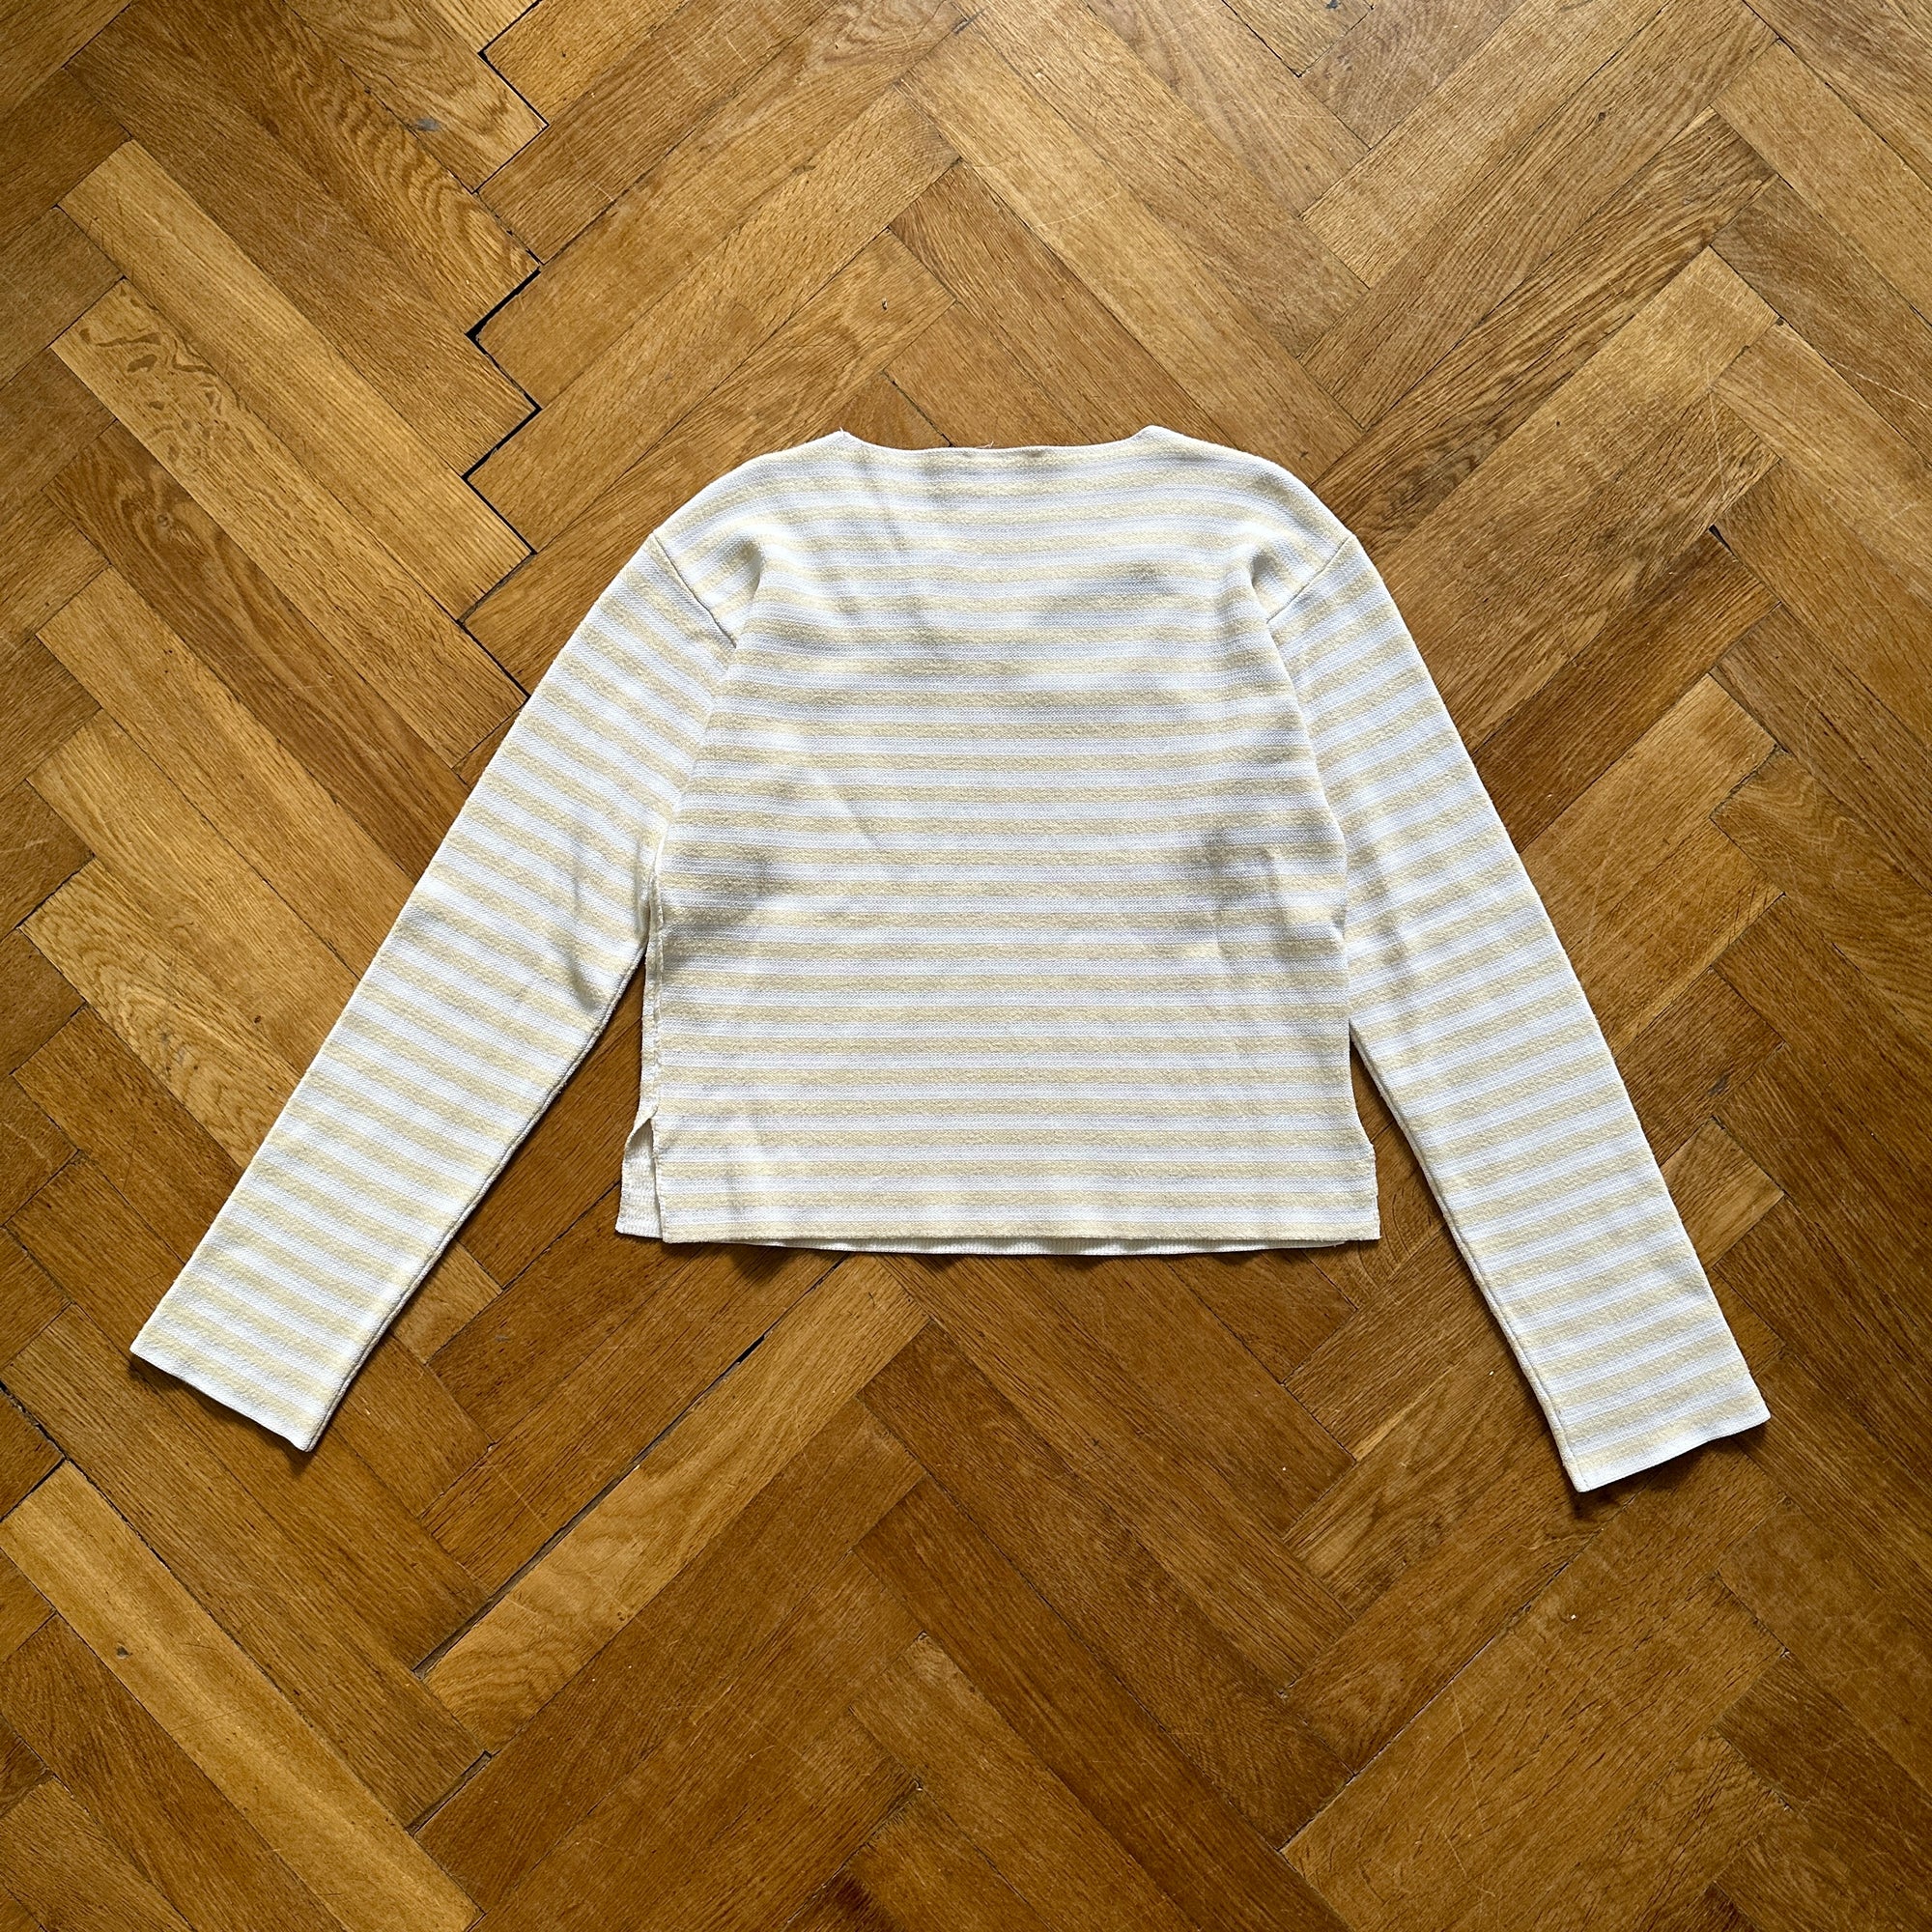 Celine by Phoebe Philo Cut Out Knit Striped Sweater